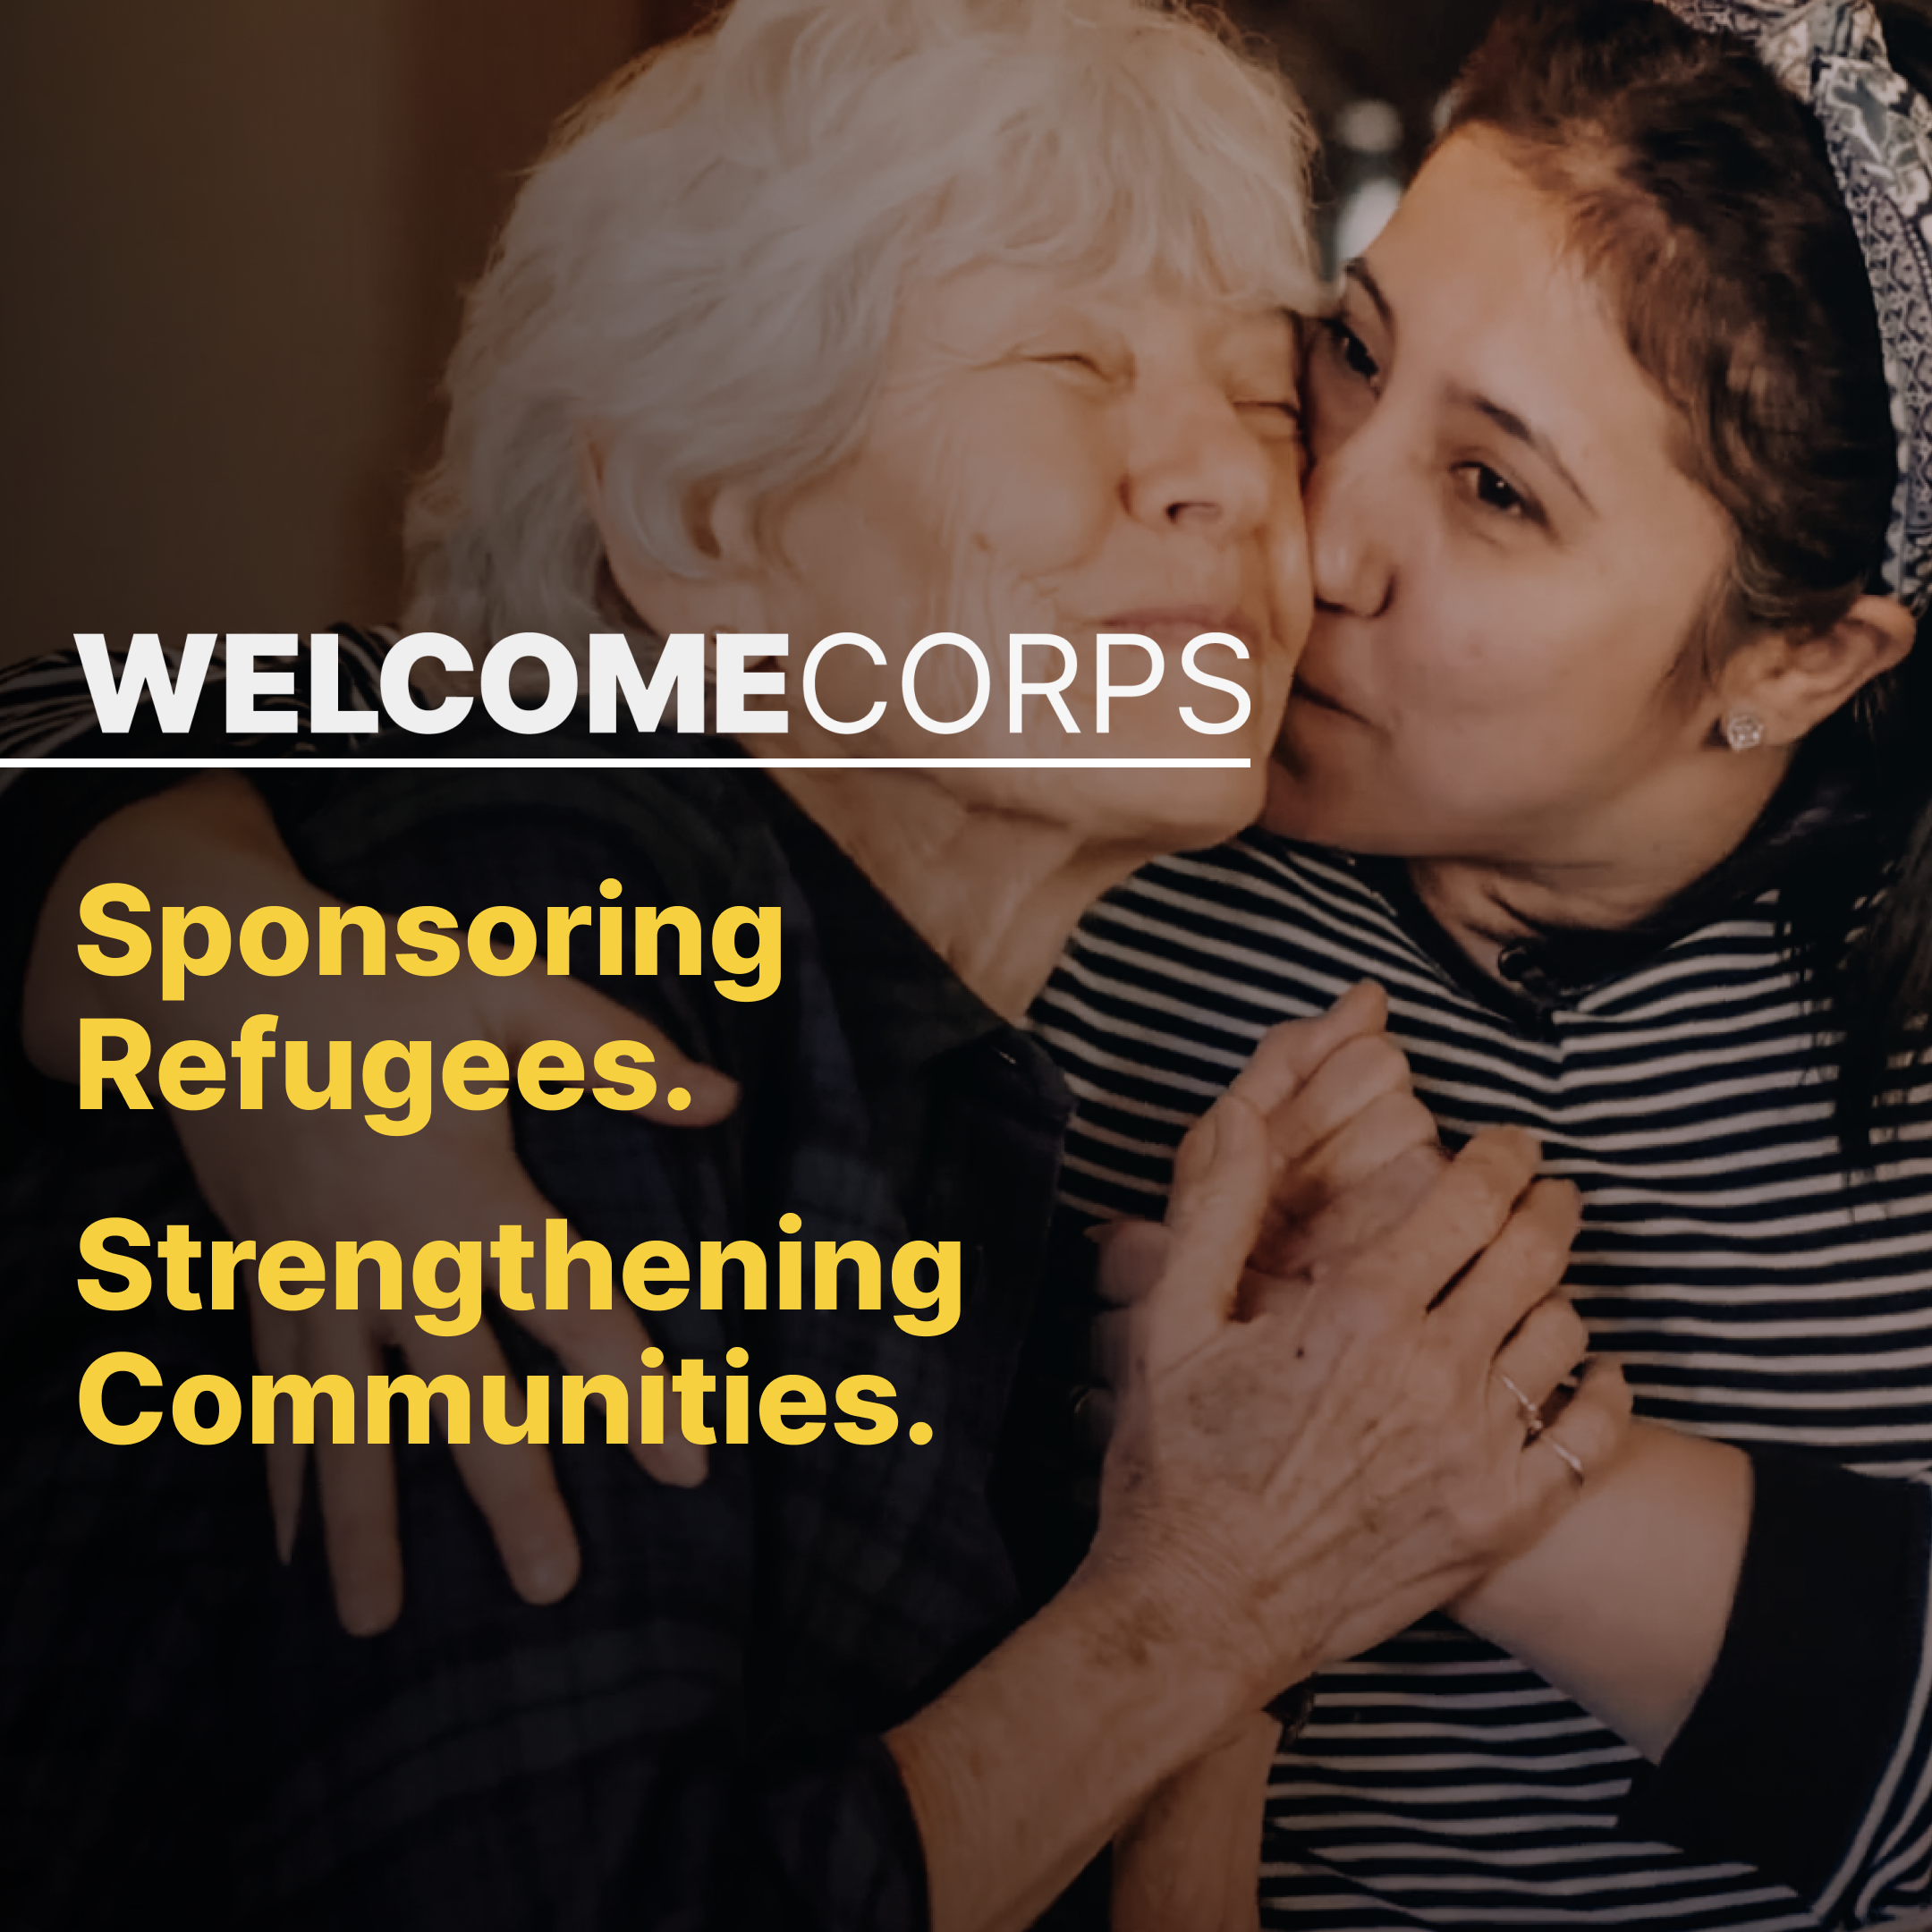 Two women embracing with text overlay: "Welcome Corps. Sponsoring Refugees. Strengthening Communities."